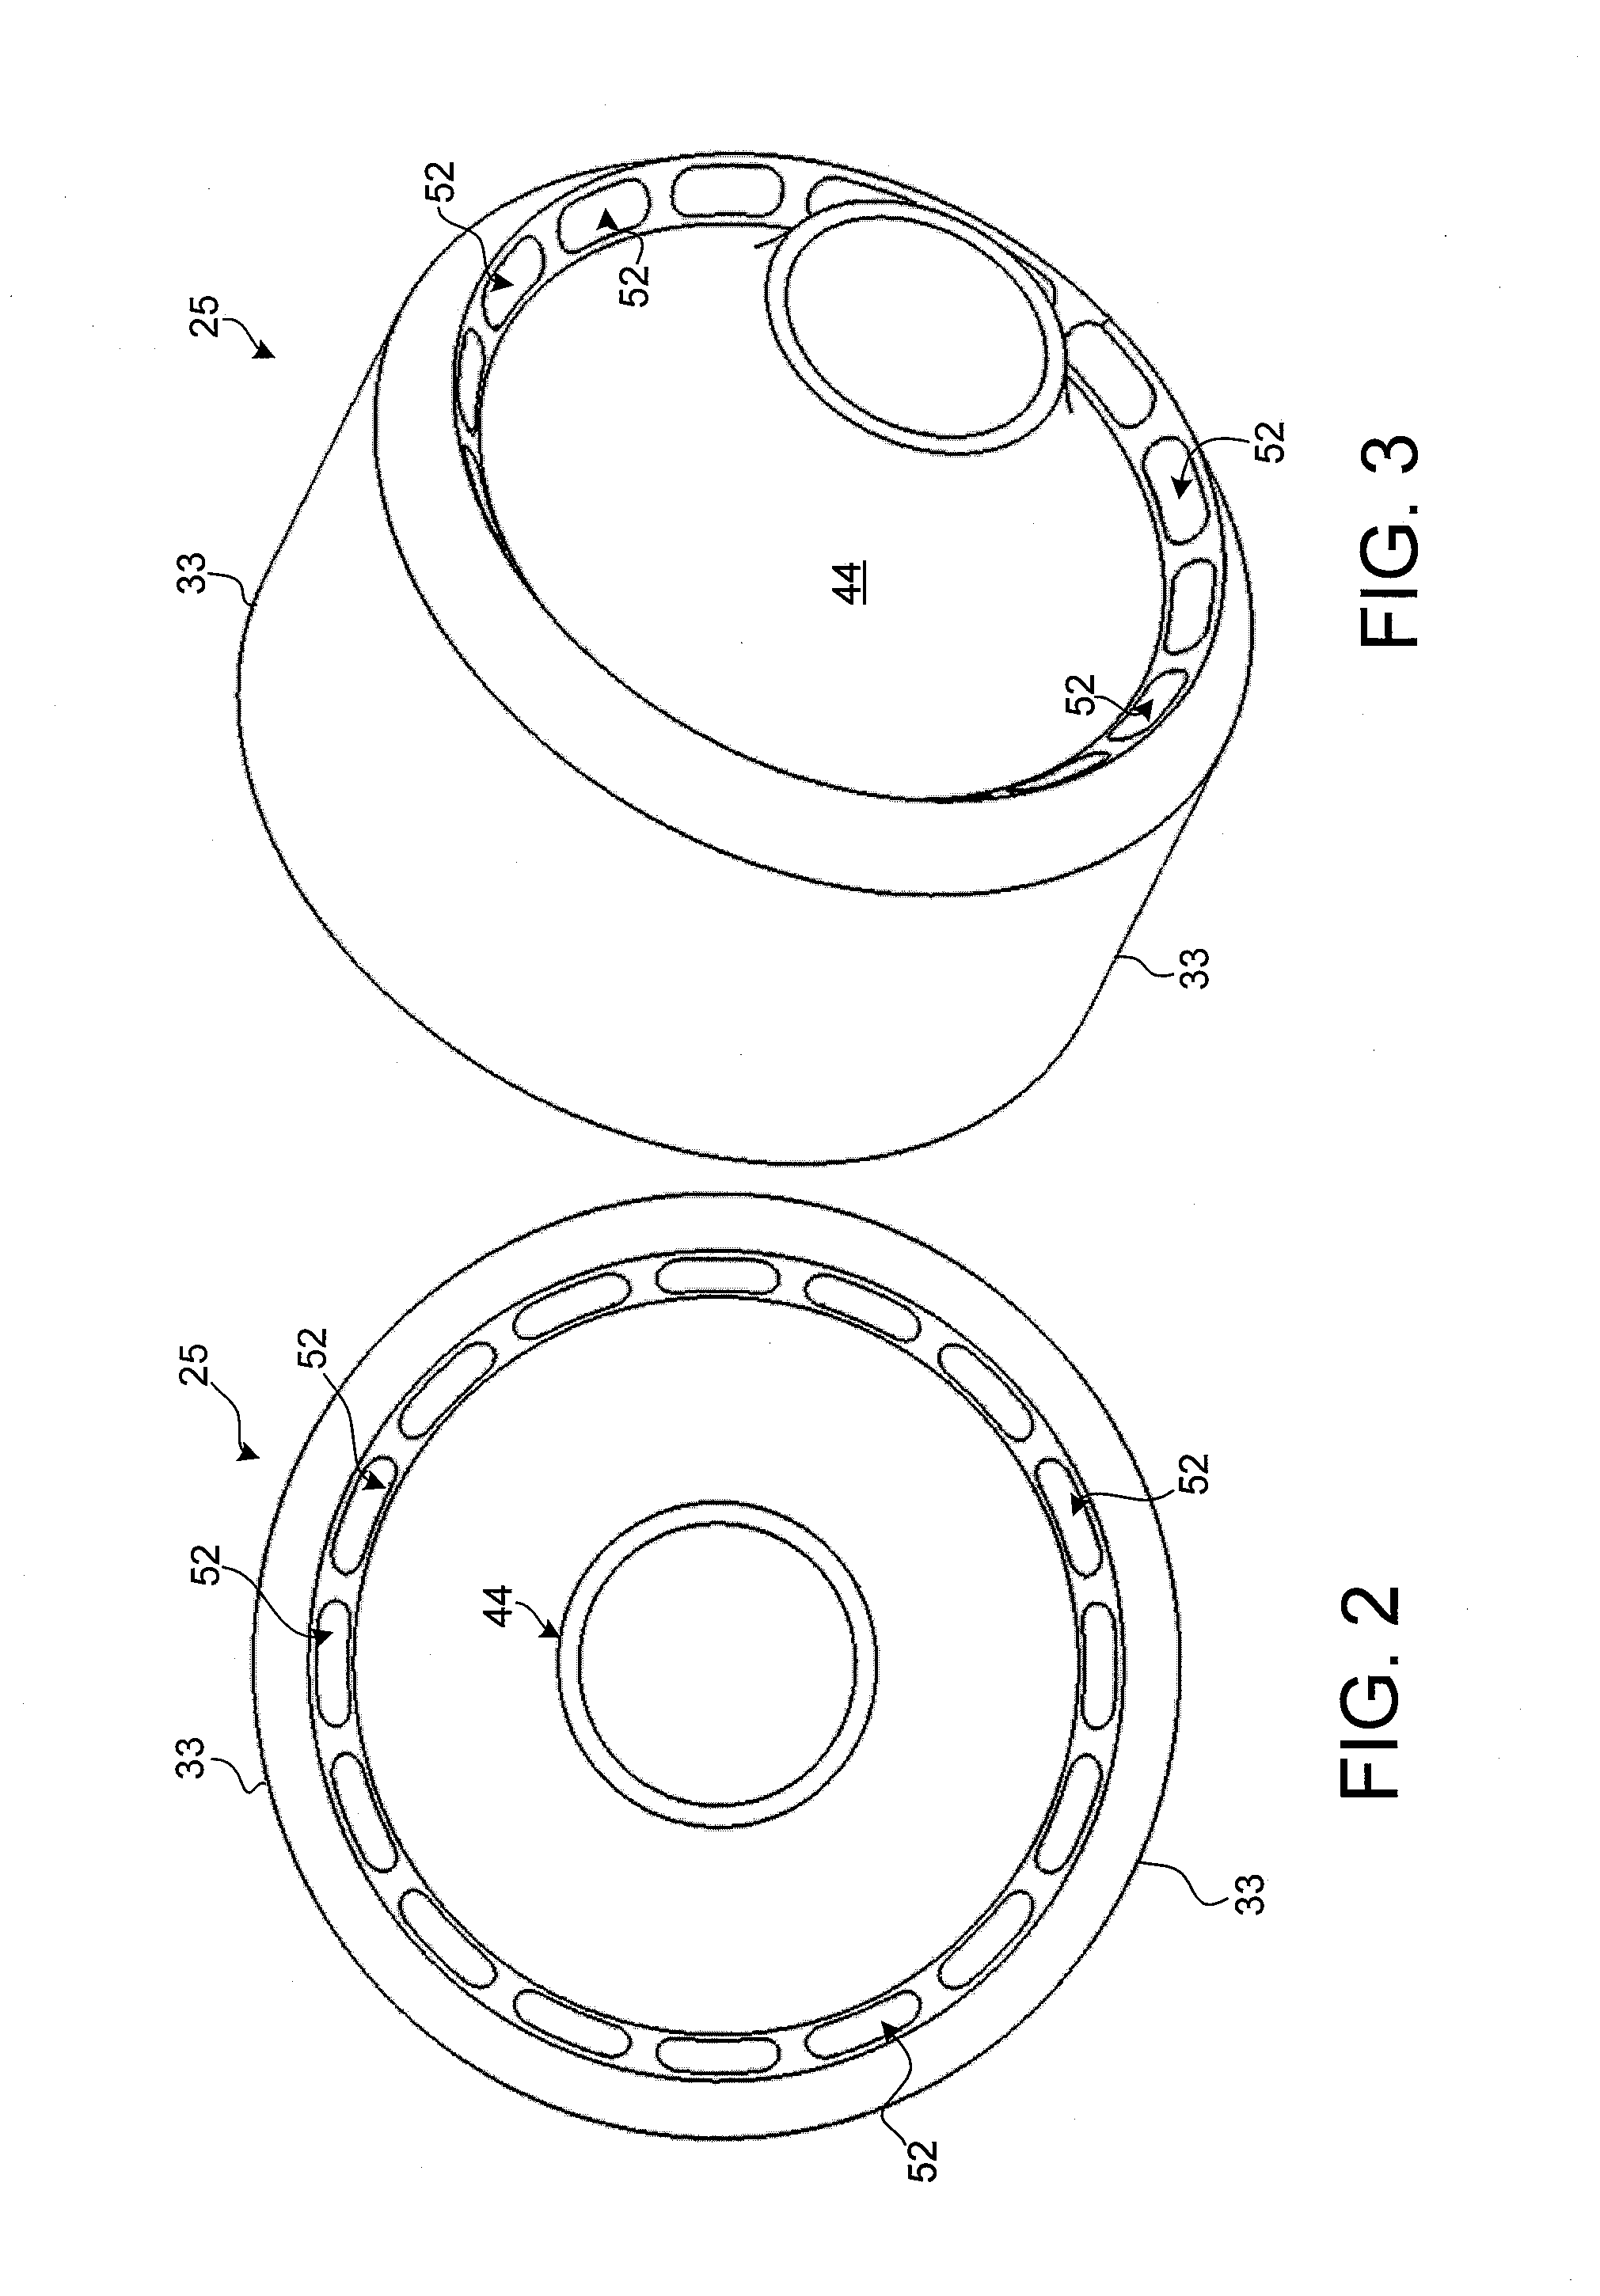 Rocket based combined cycle propulsion unit having external rocket thrusters